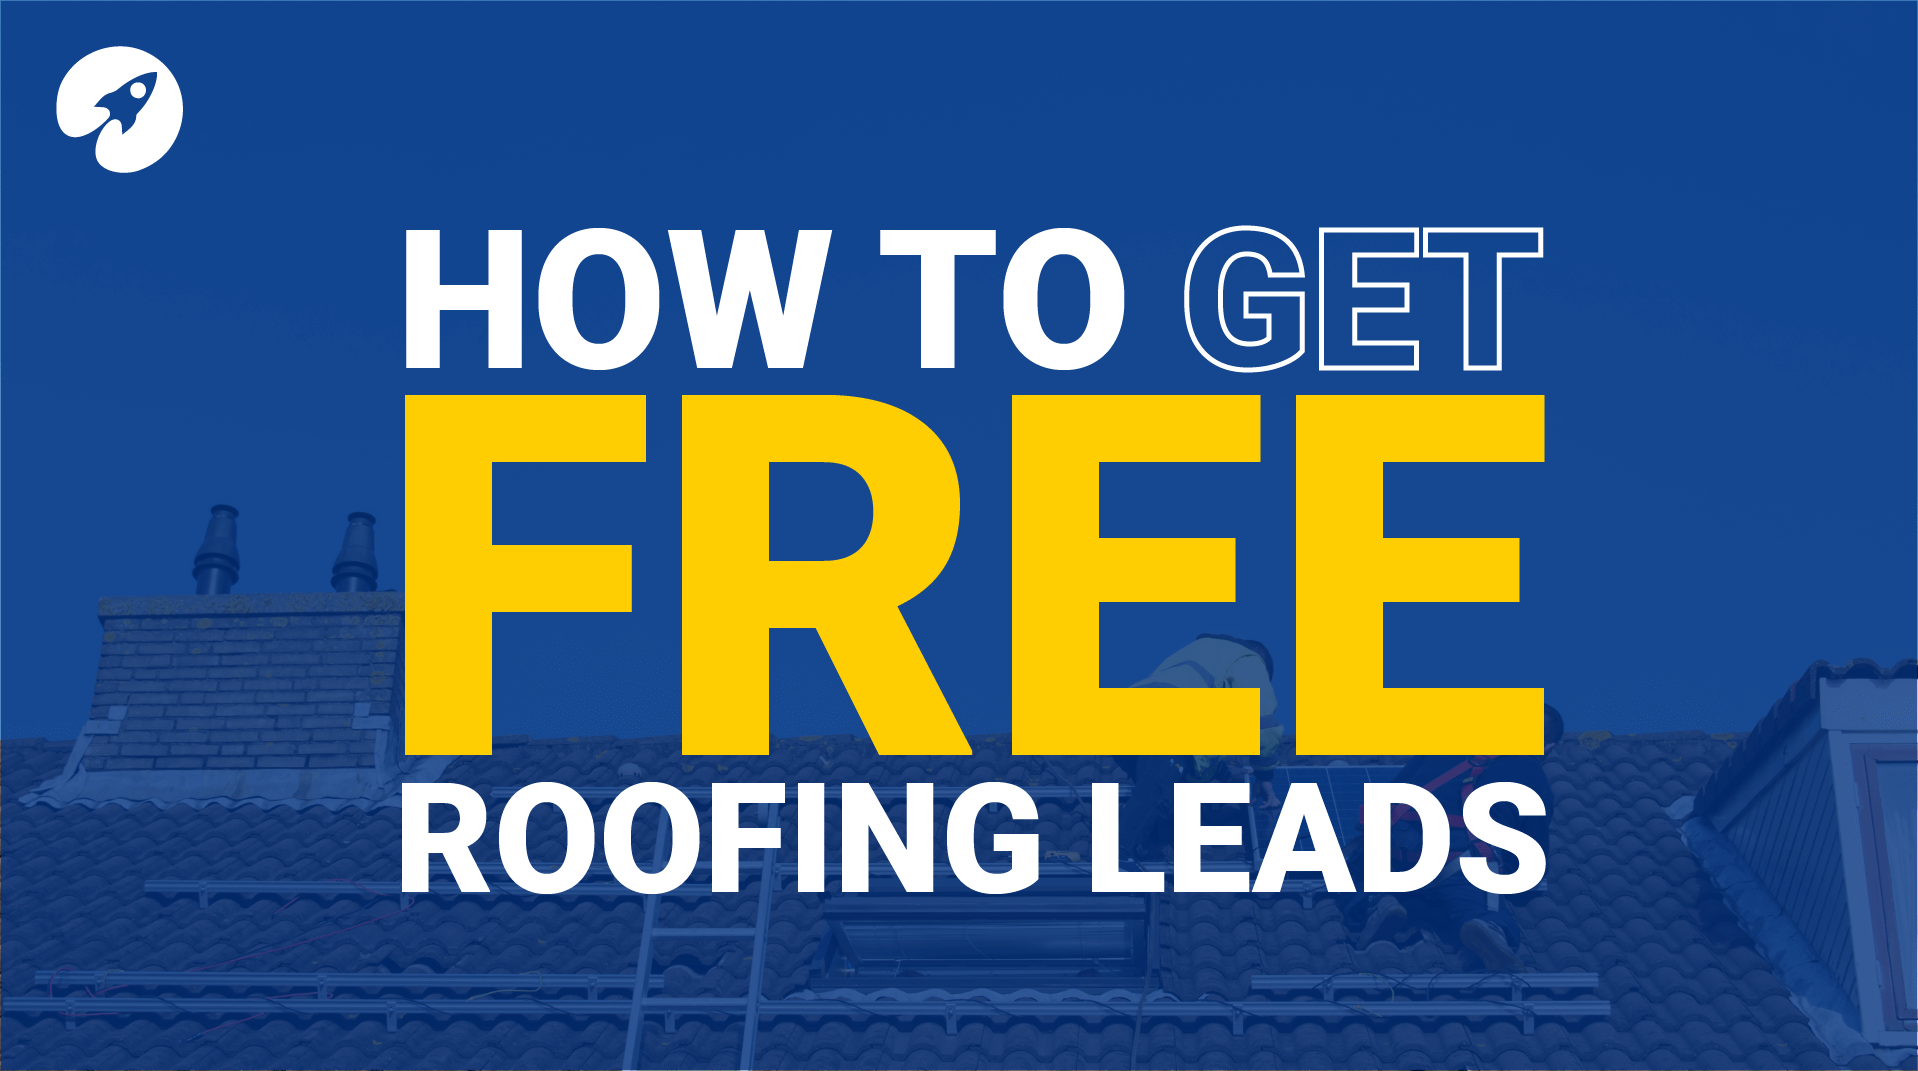 How to get free roofing leads